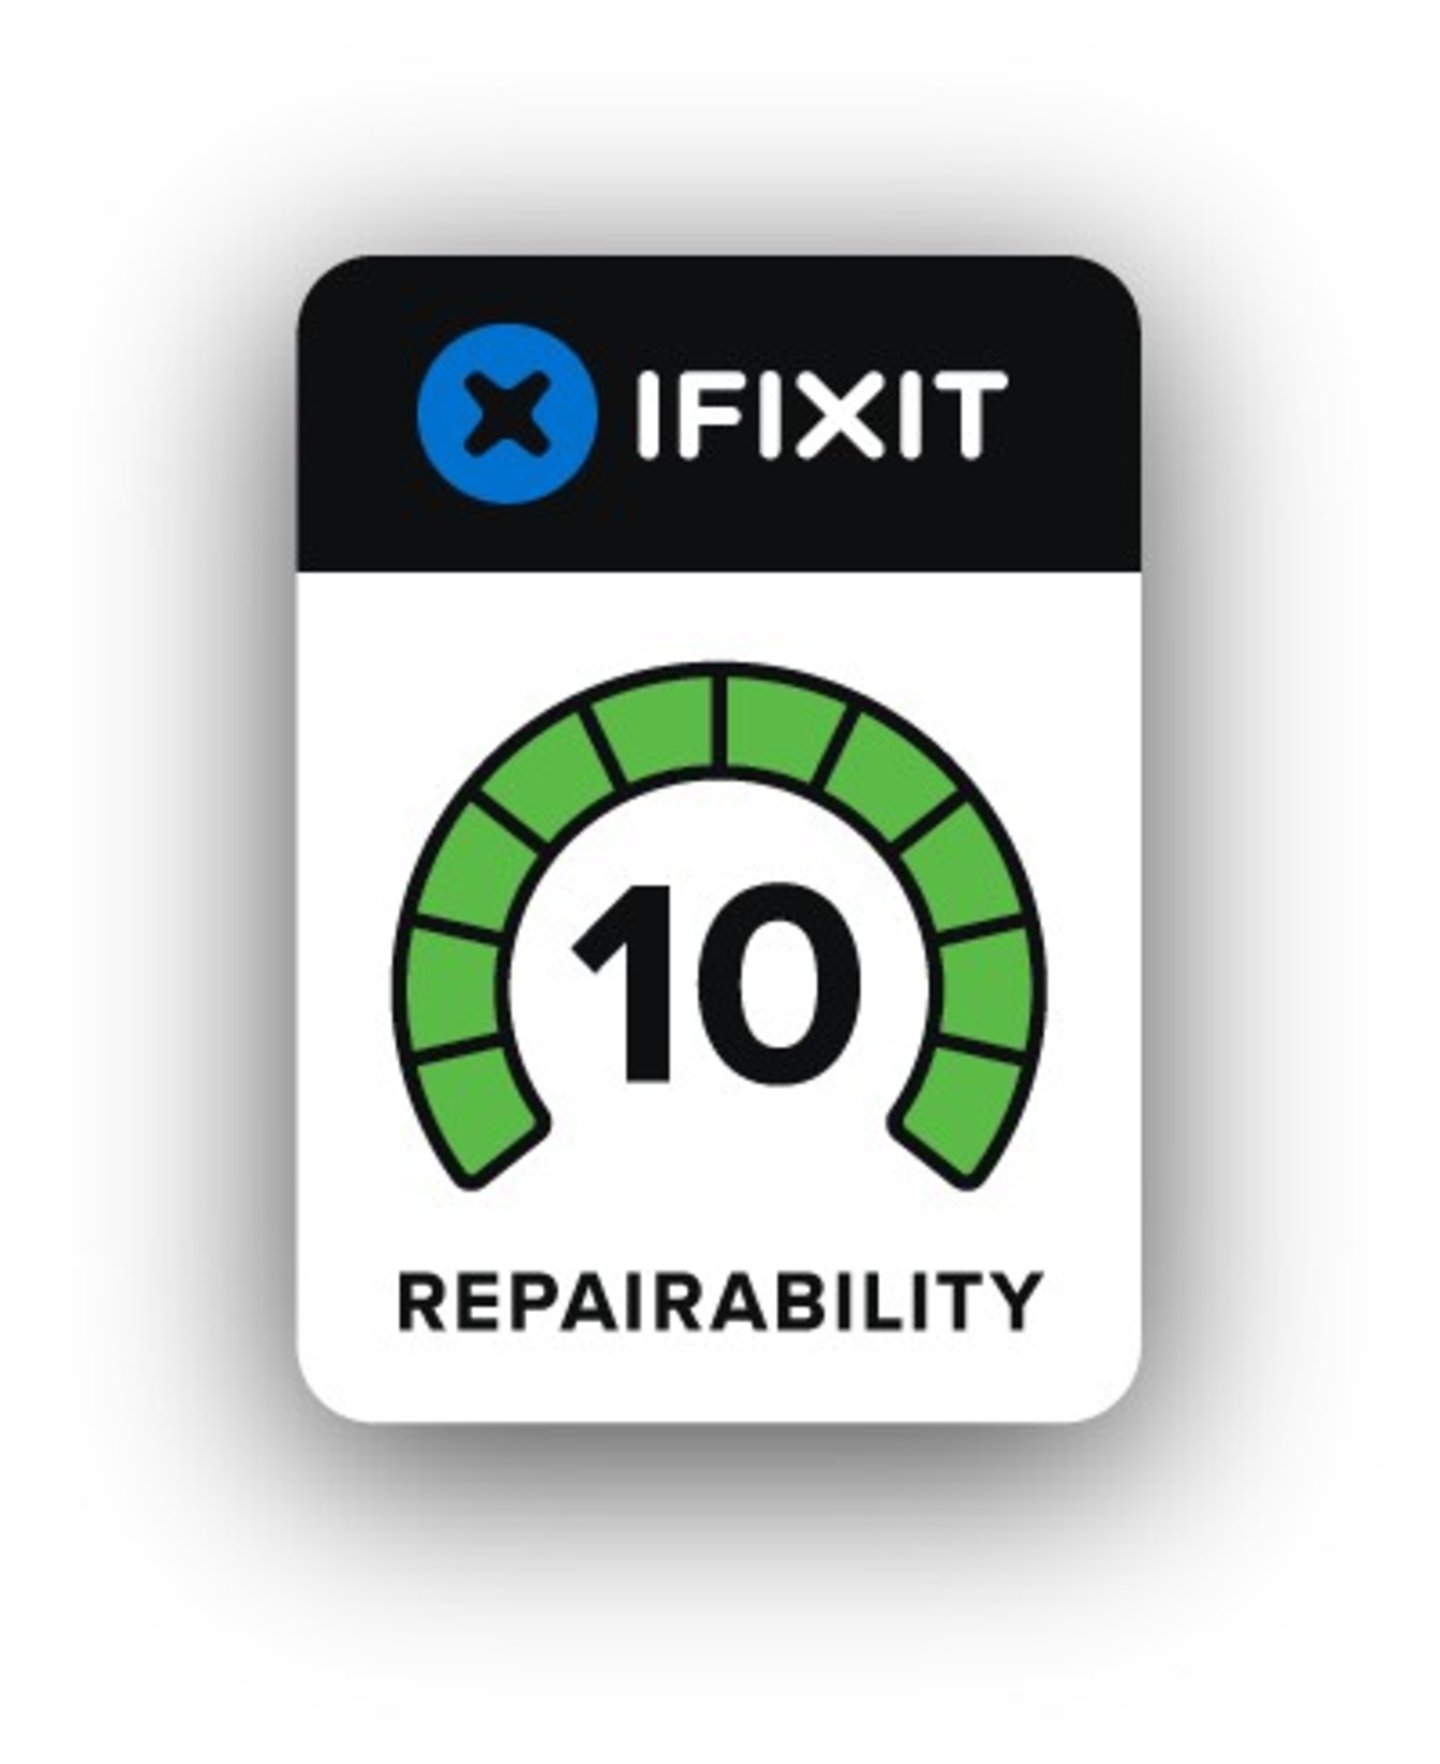 This is the first mobile phone with a repairability of 10 according to iFixit